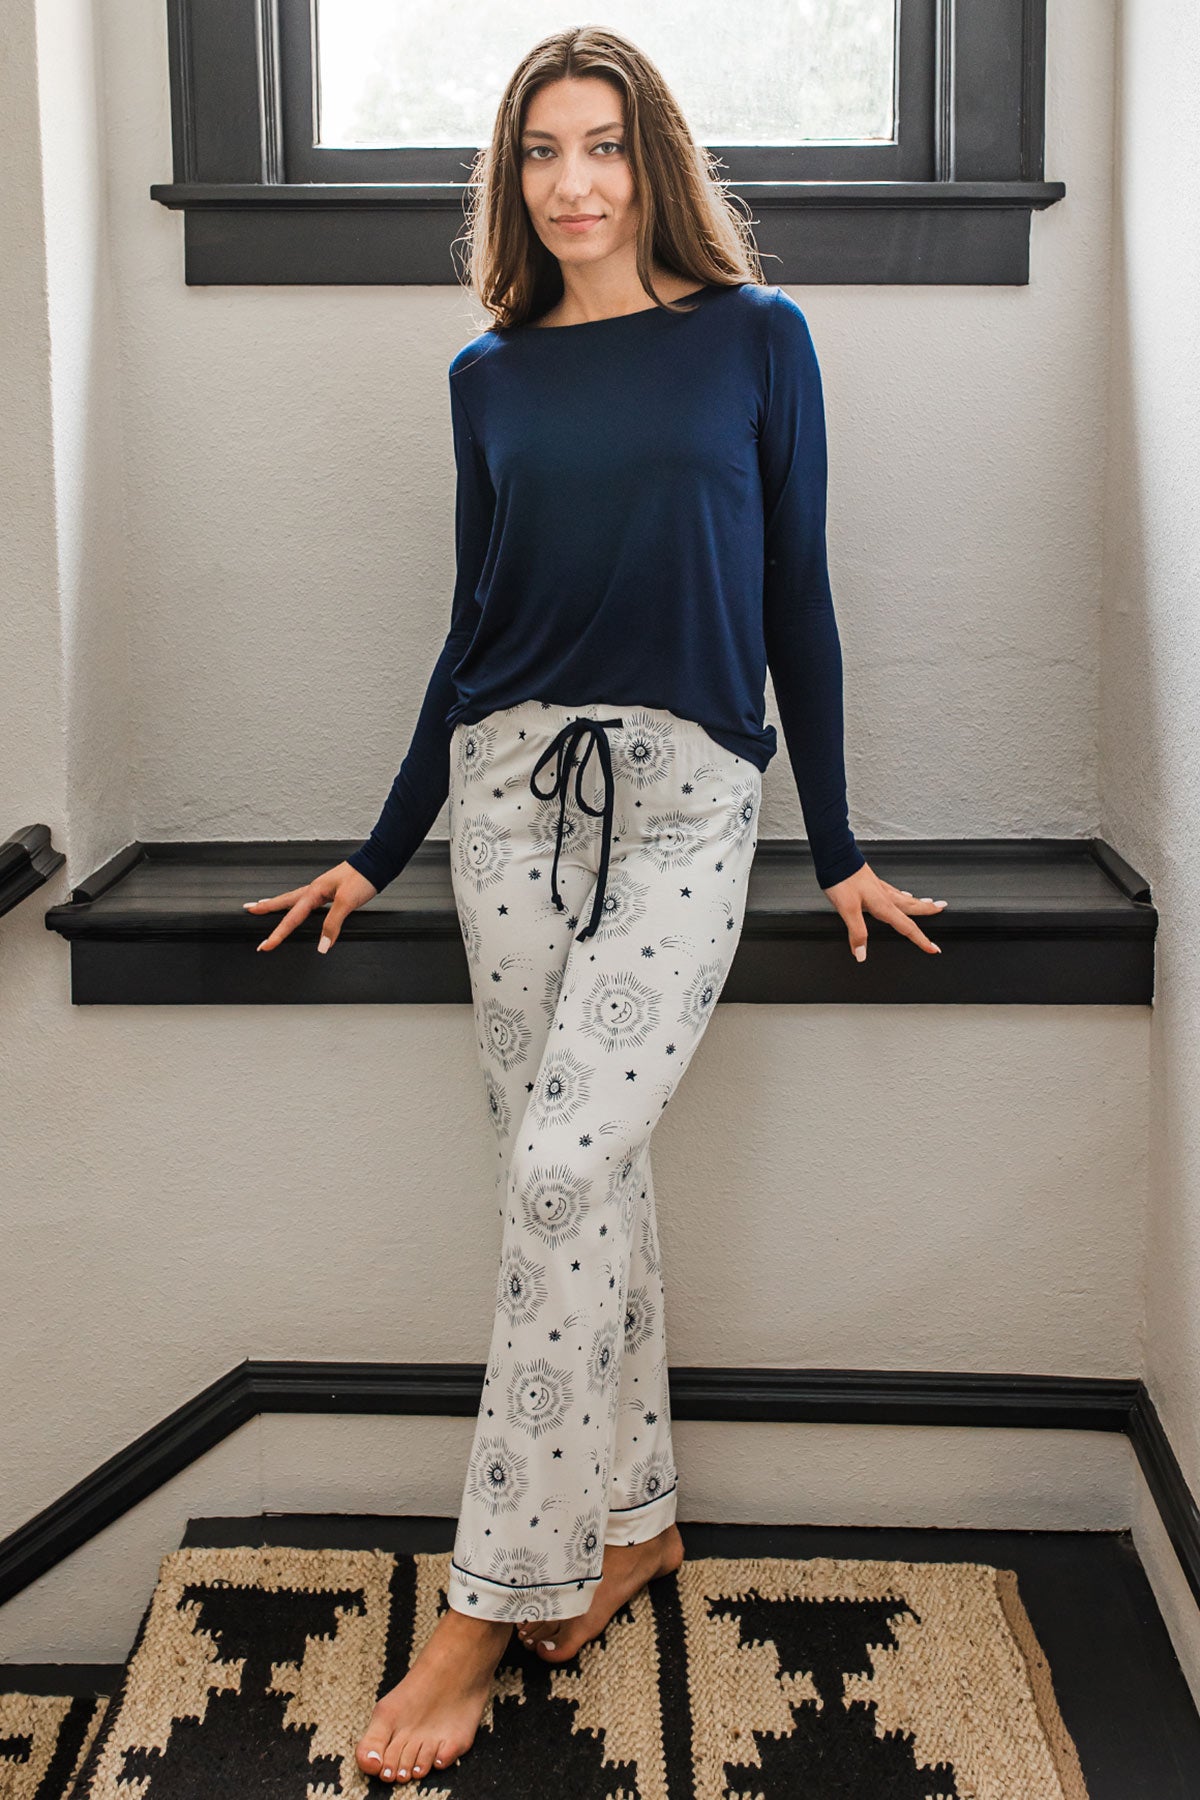 A woman standing in a stairwell and leaning back against a shelf, wearing Yala Gillian Piped Bamboo Pajama Pants